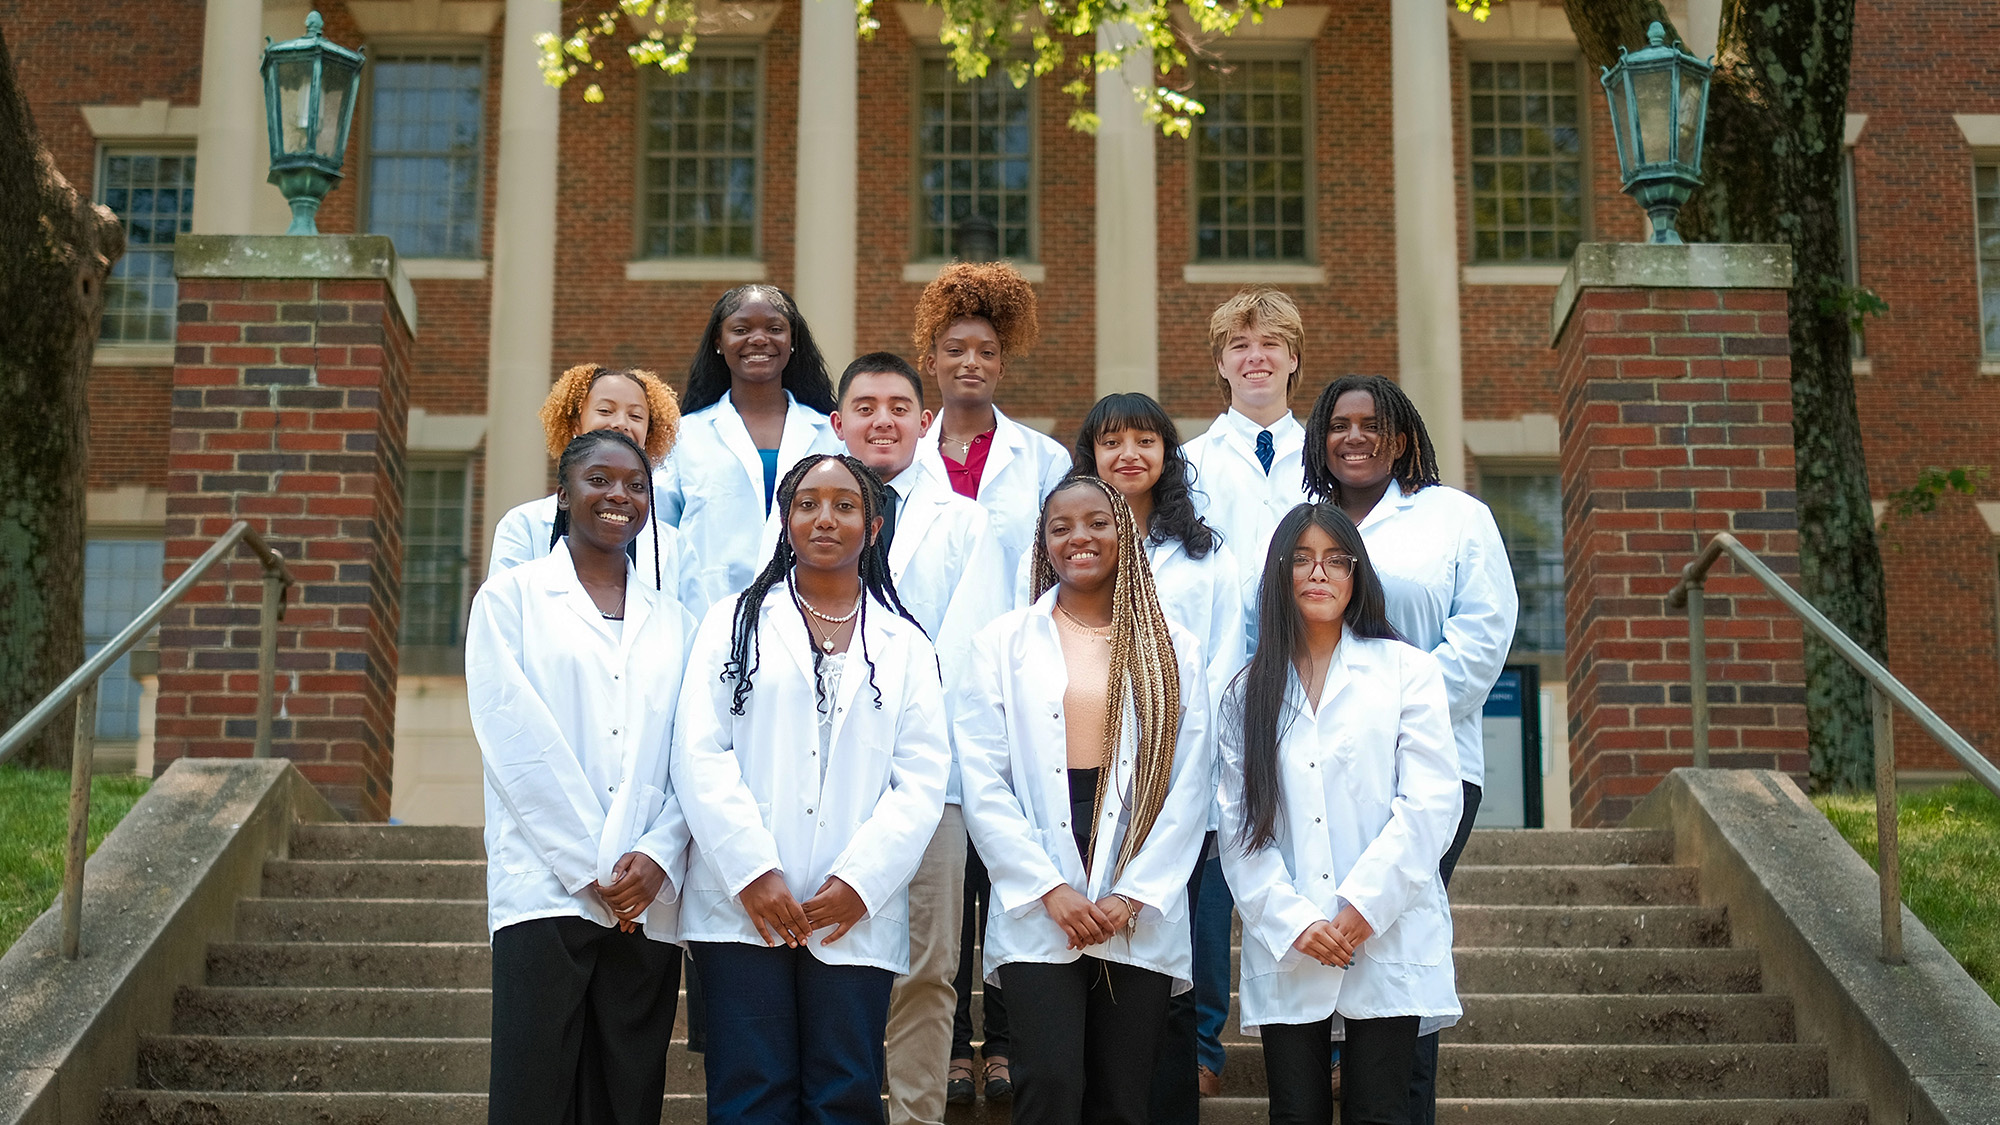 The eight students who were GEP scholars stand on steps in front of the Med-Dent Building on campus wearing white coats